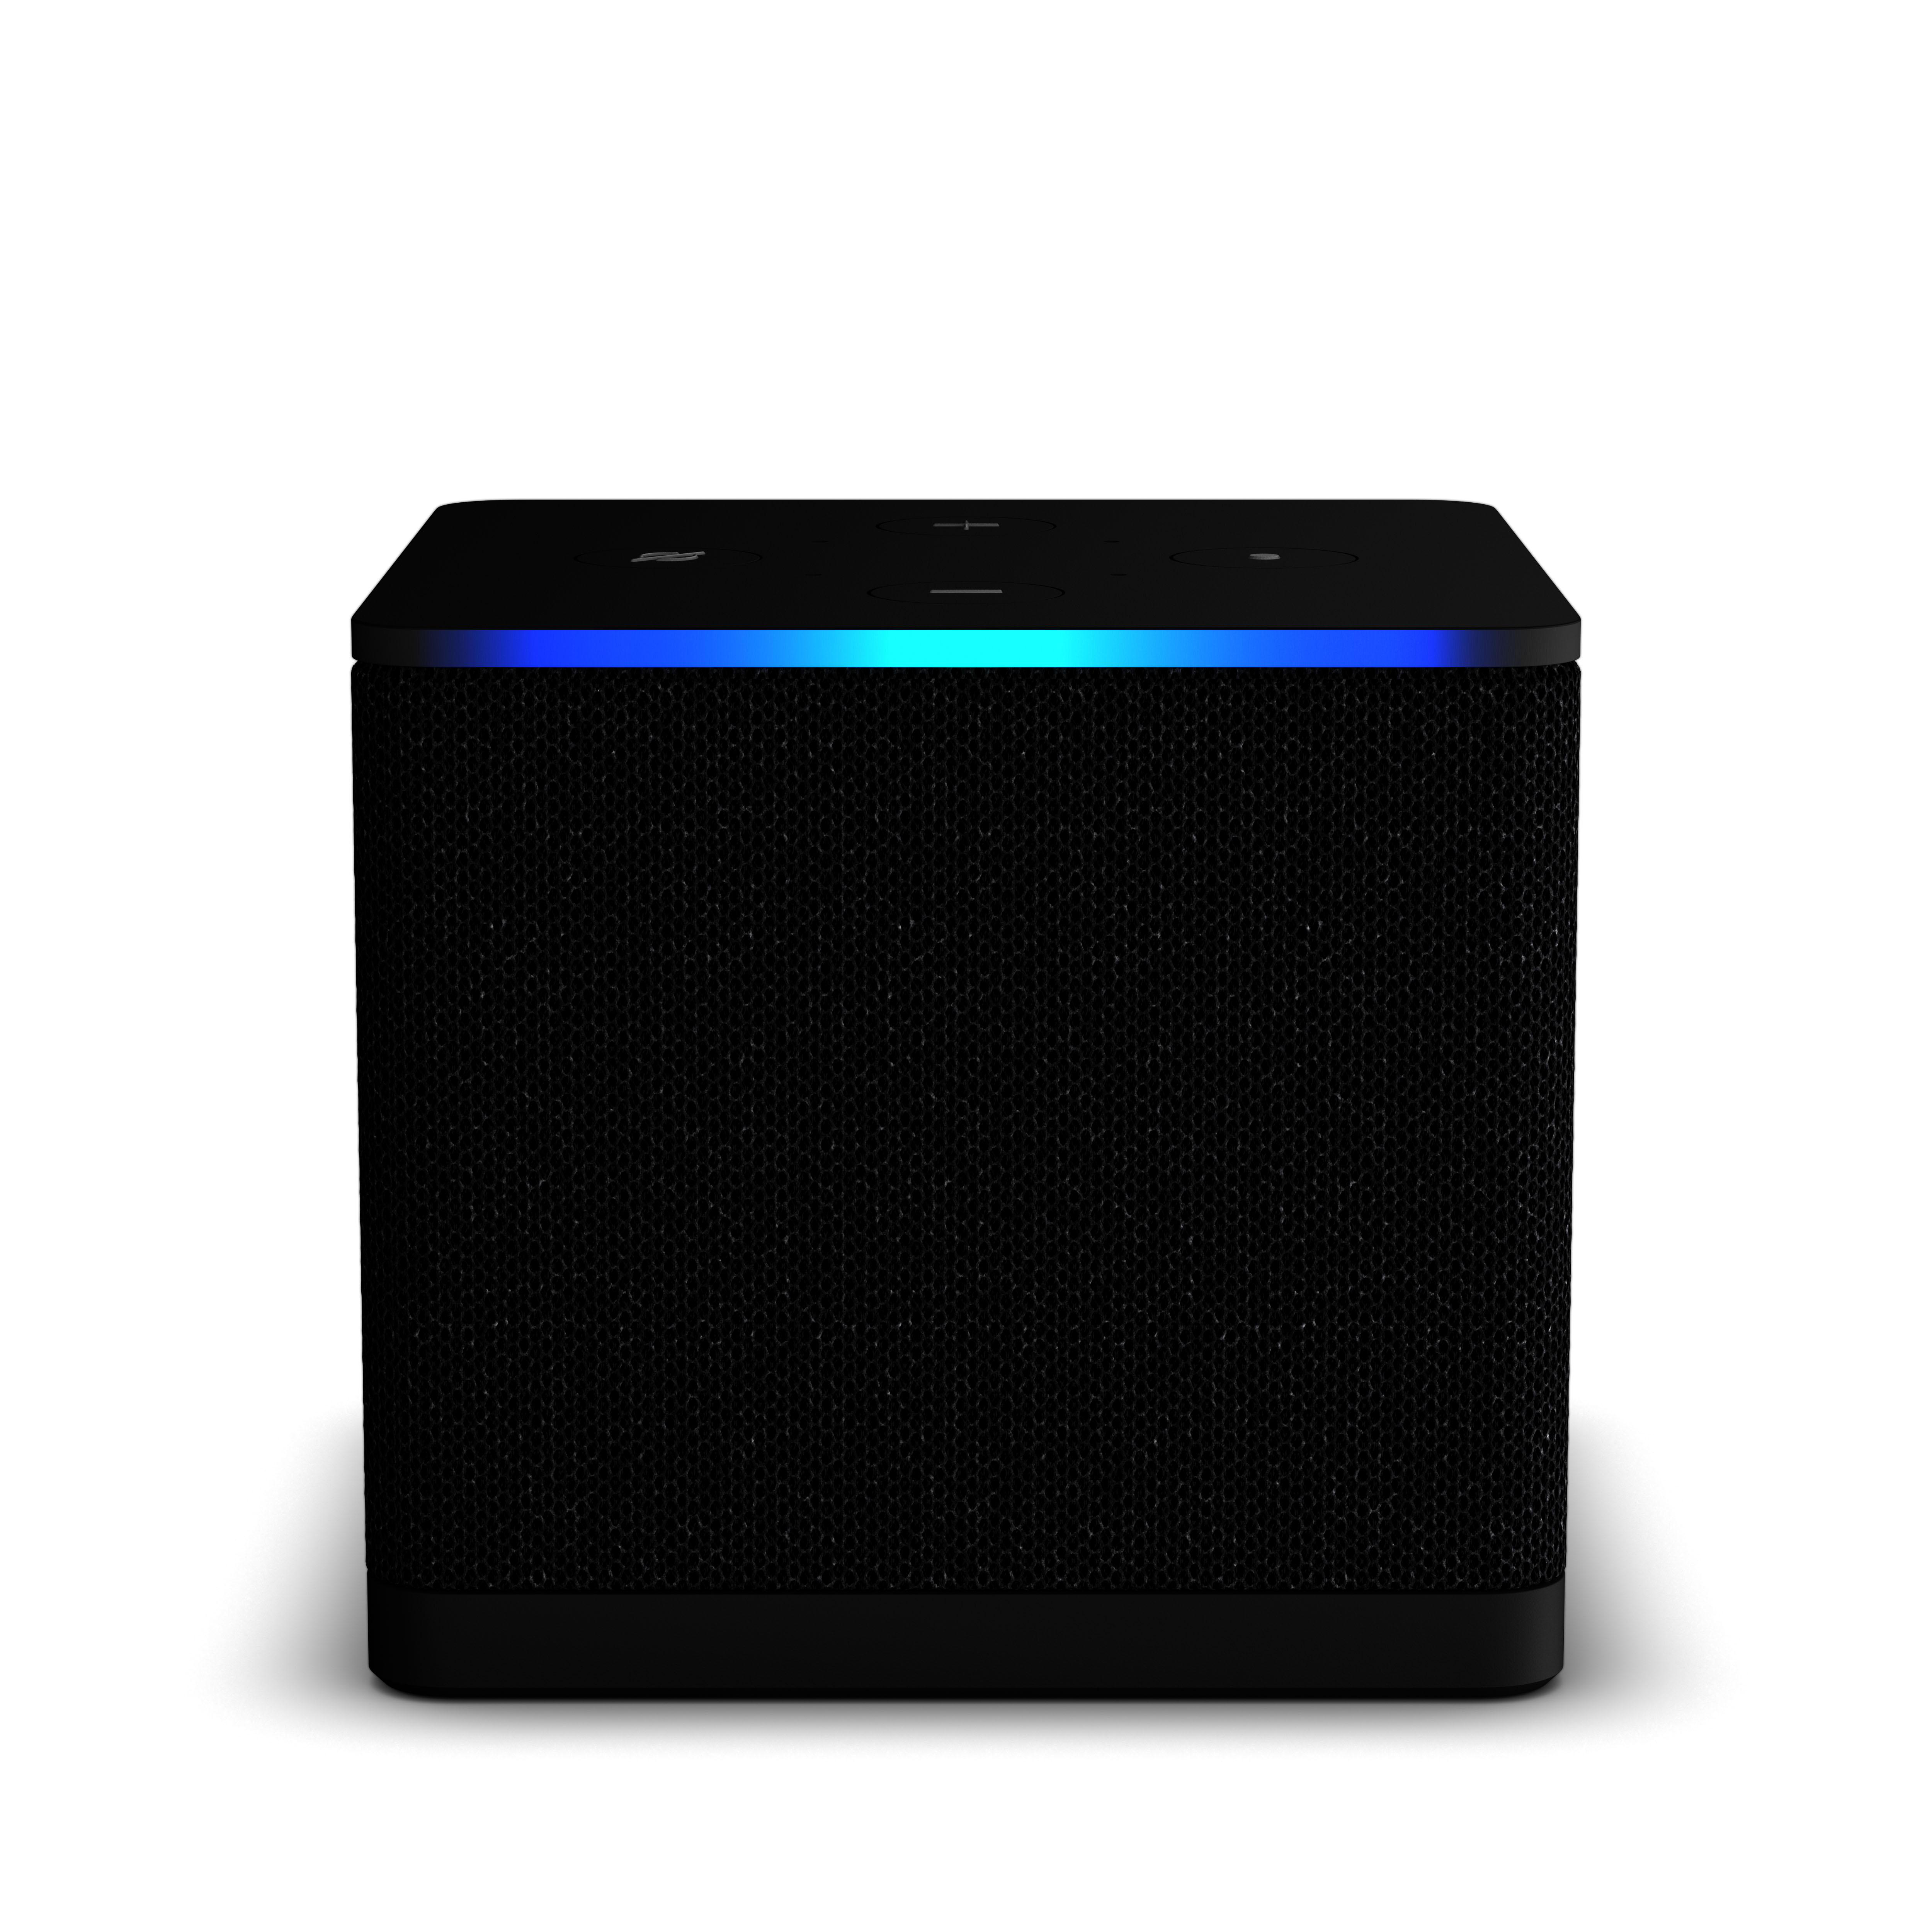 Tv Streaming Mediaplayer, Black Fire Cube AMAZON